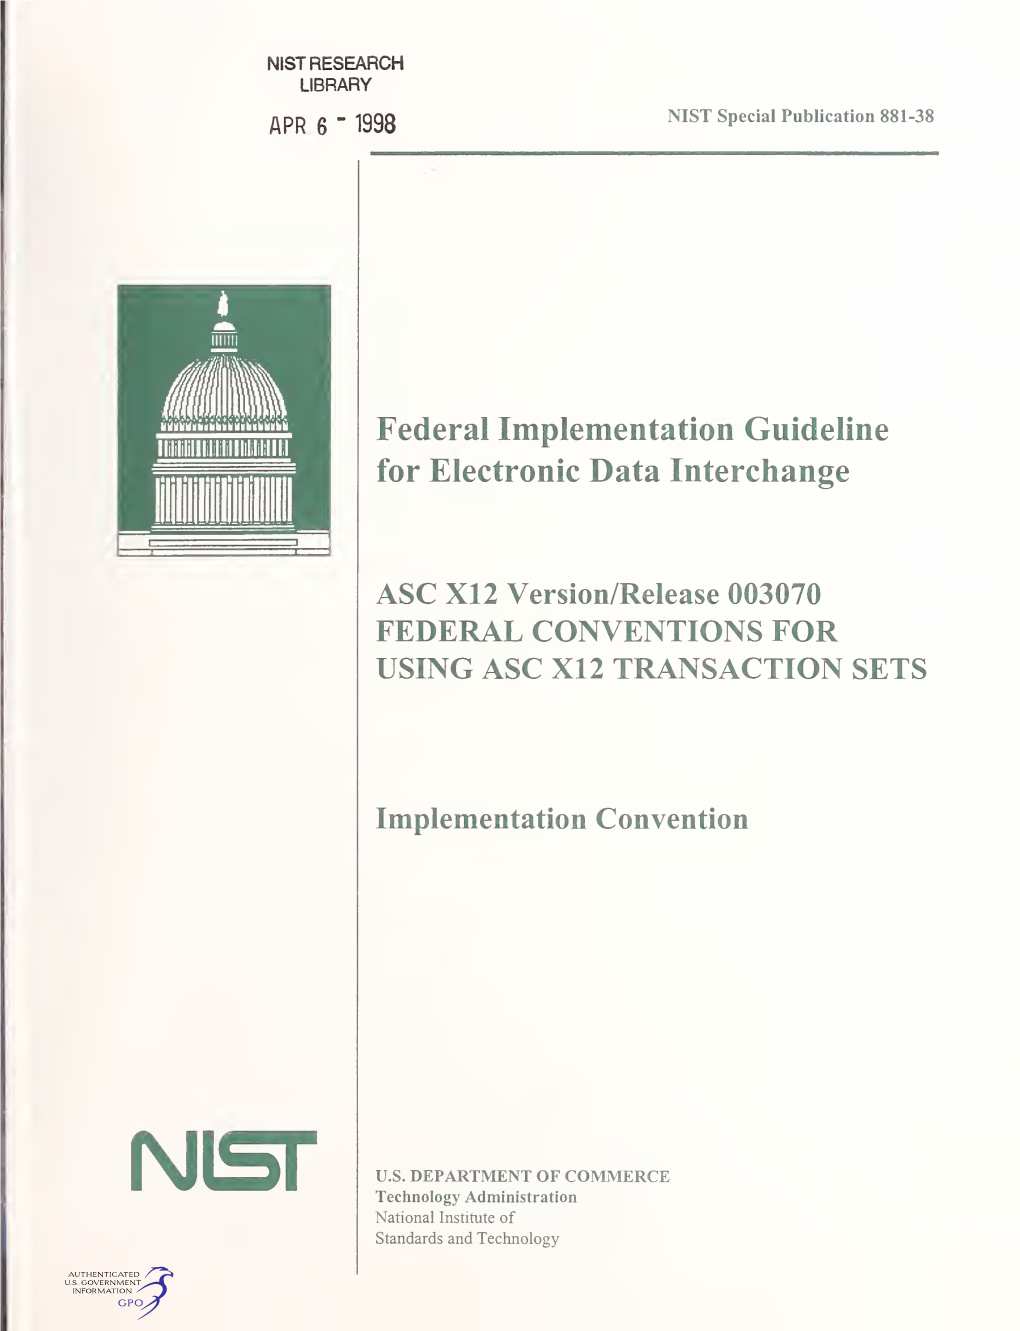 Federal Implementation Guideline for Electronic Data Interchange